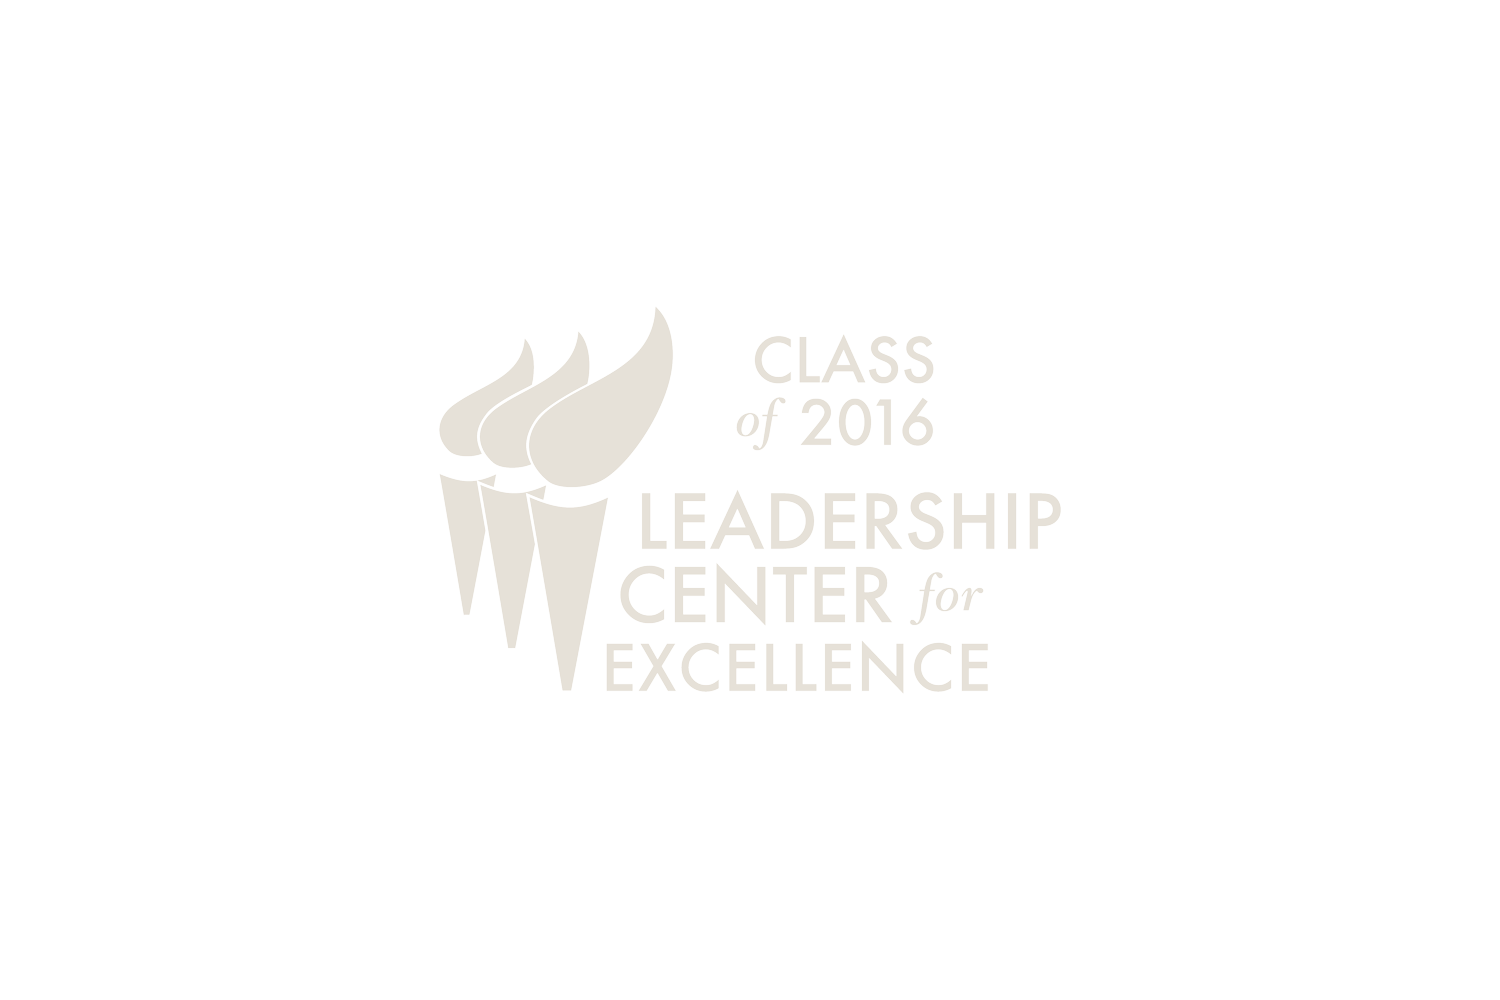 leadership-center-for-excellence-2016-logo.png